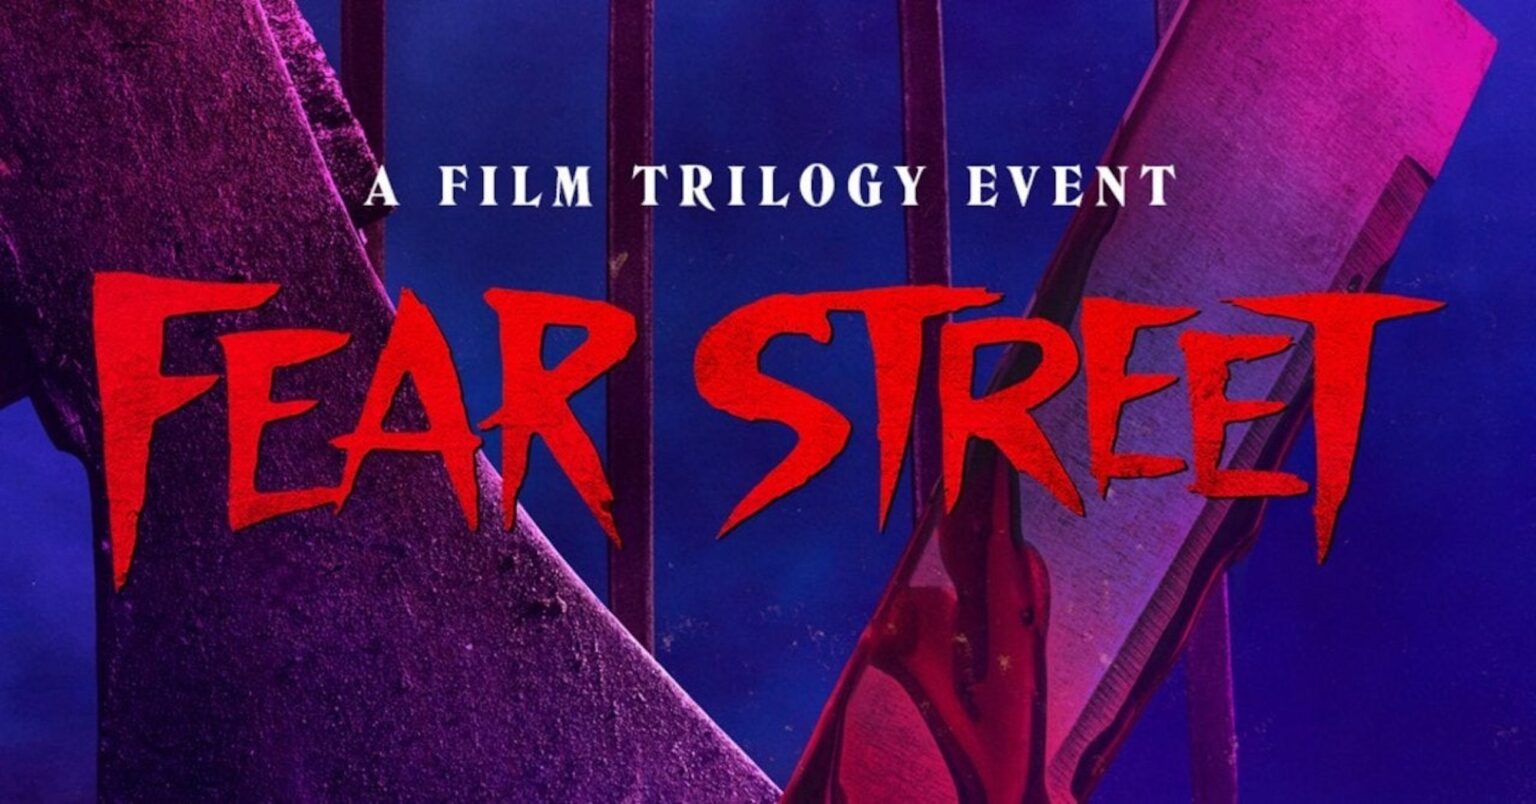 How did Netflix's 'Fear Street' movies become such a success? See why these top horror movies may set a trend for streamers.